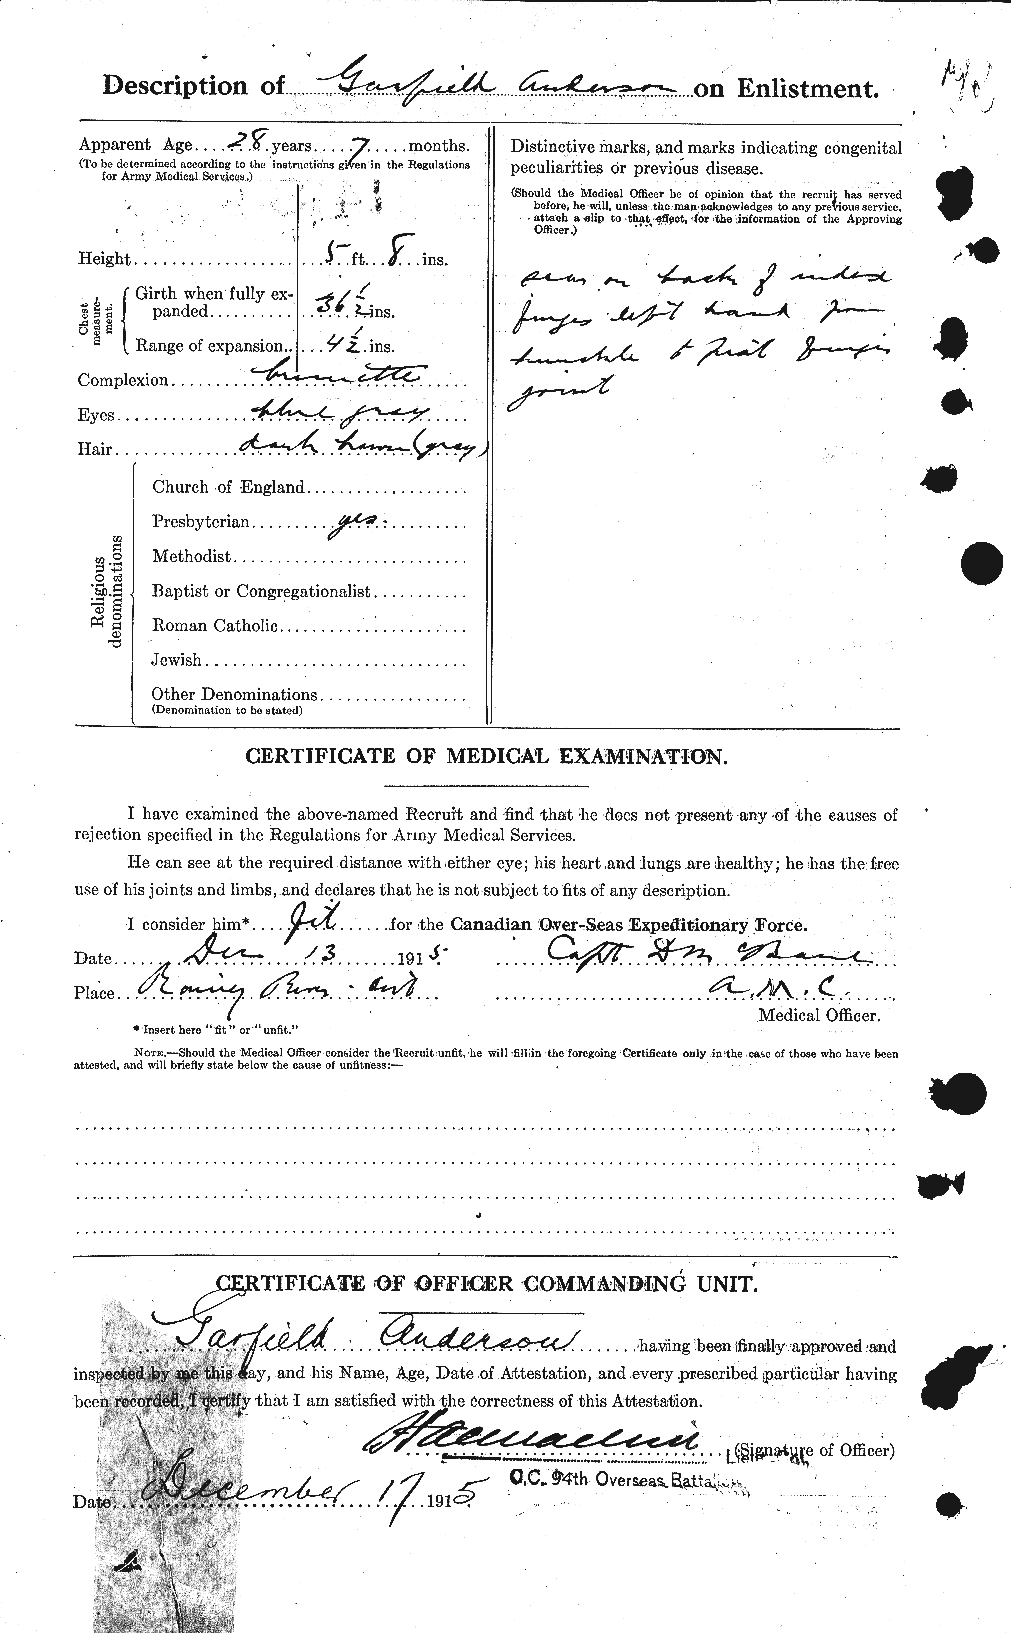 Personnel Records of the First World War - CEF 209794b